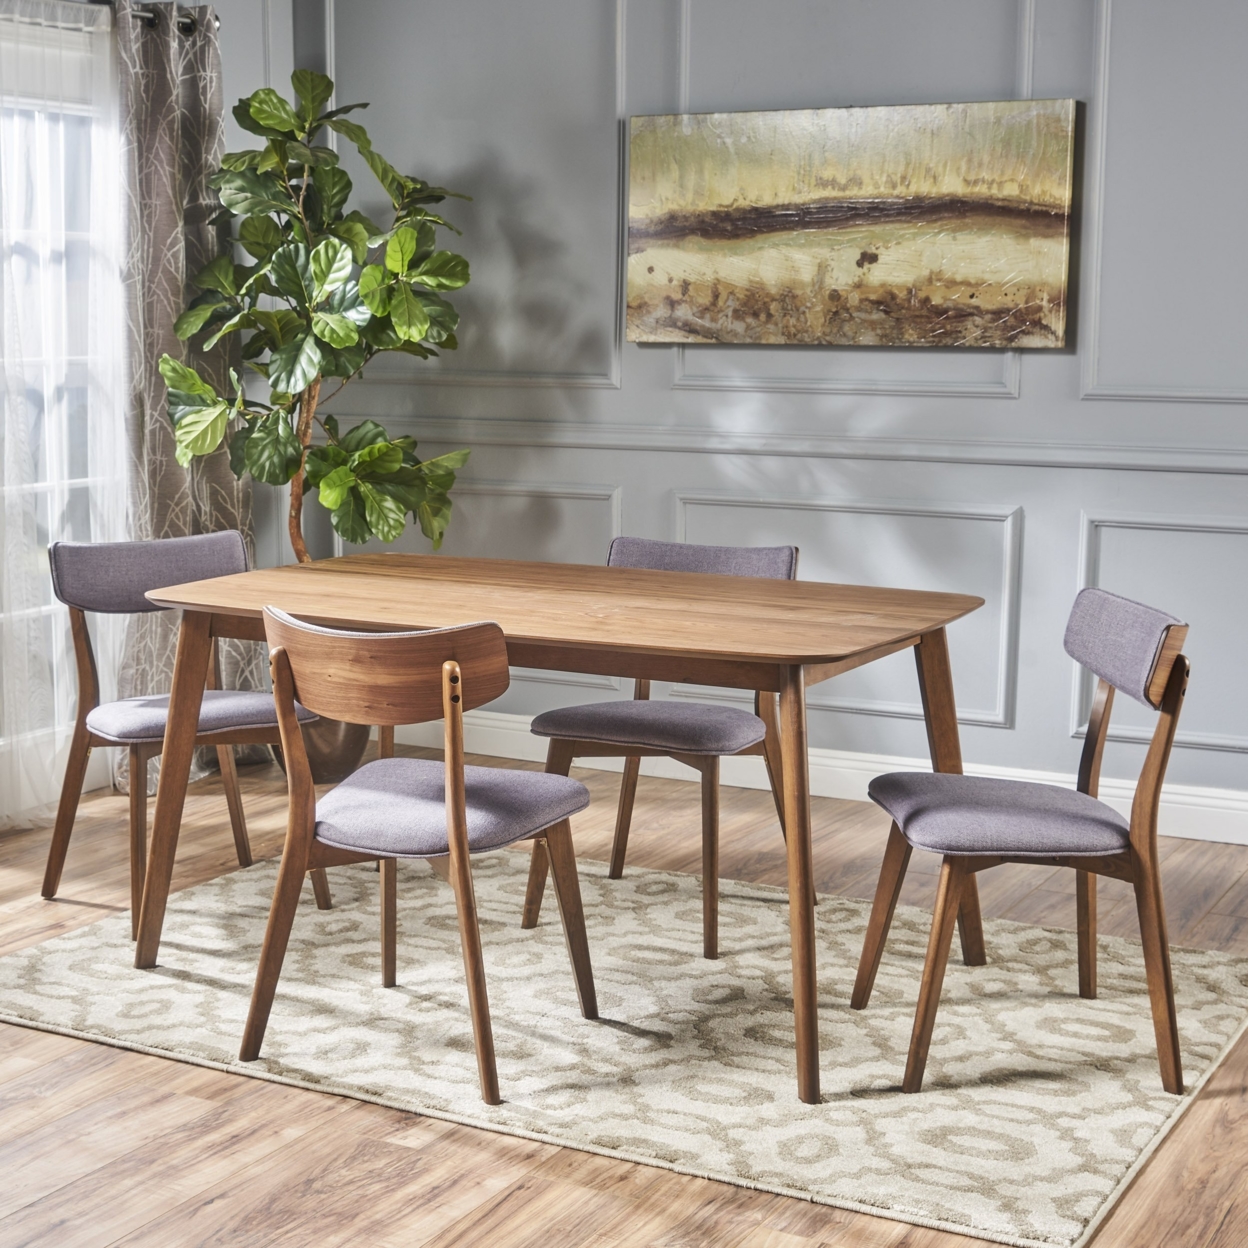 Aman Mid Century Finished 5 Piece Wood Dining Set With Fabric Chairs - Light Beige